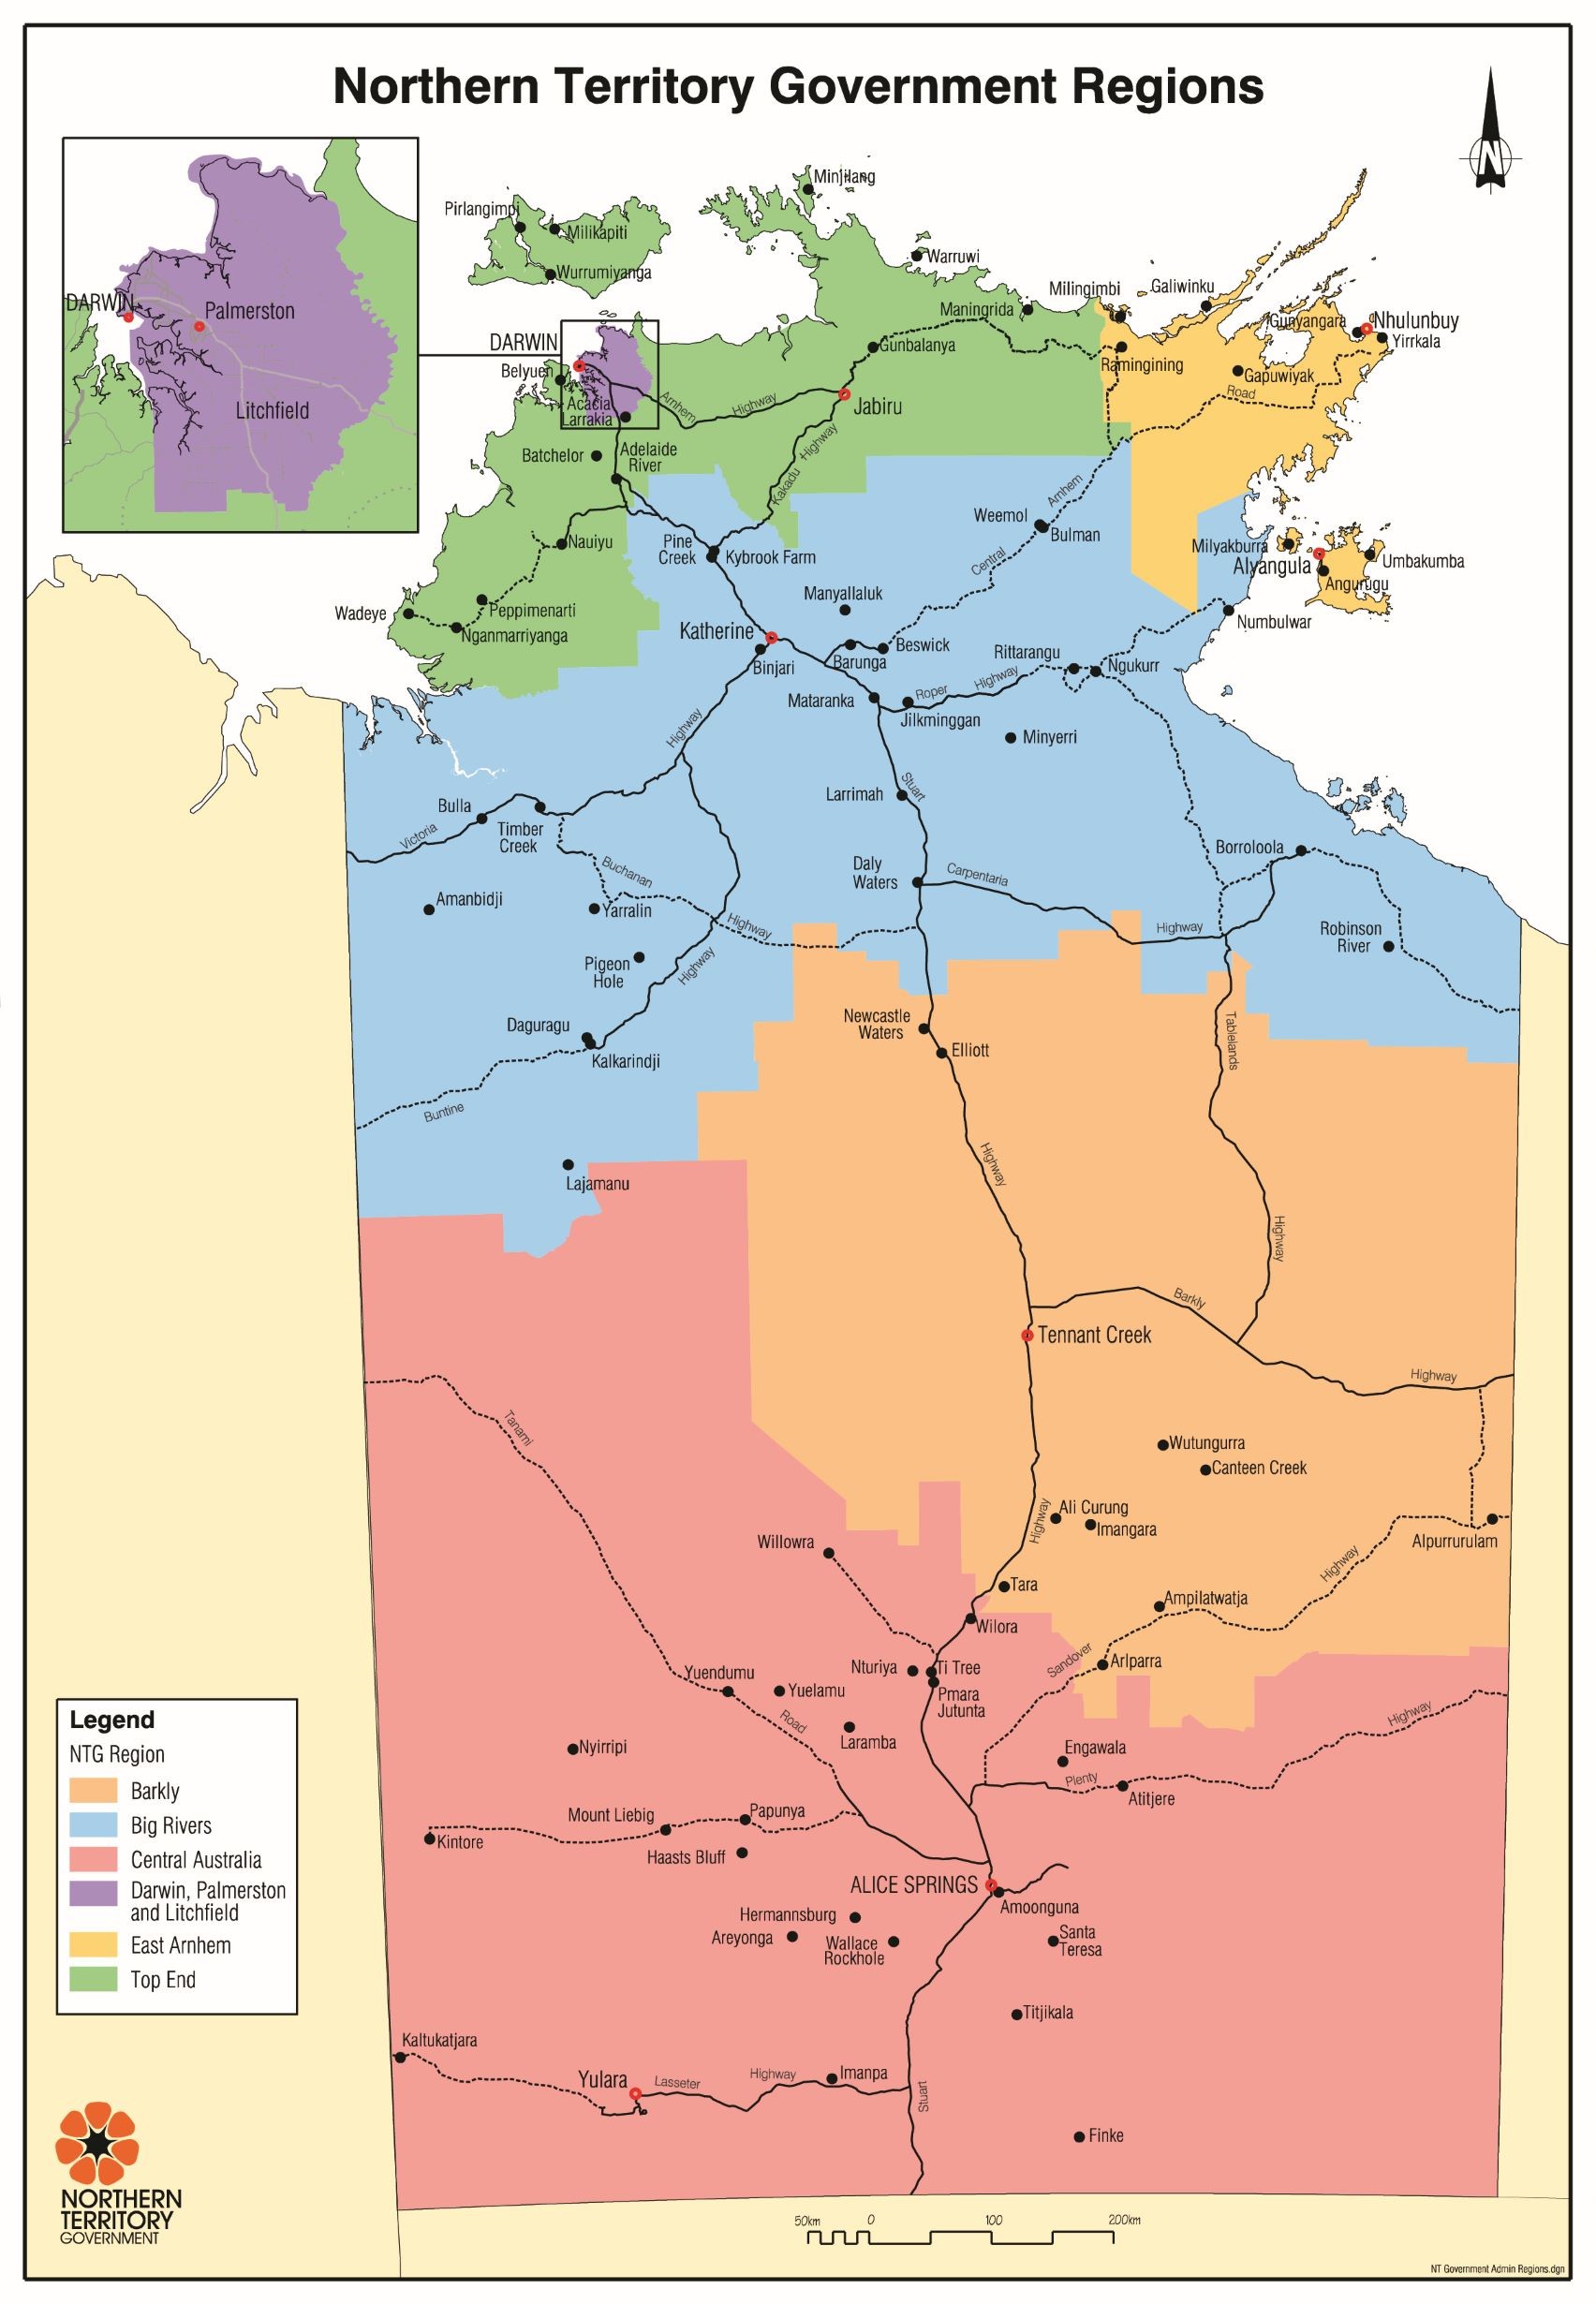 Map of the NT - color coded by region NT Government regions